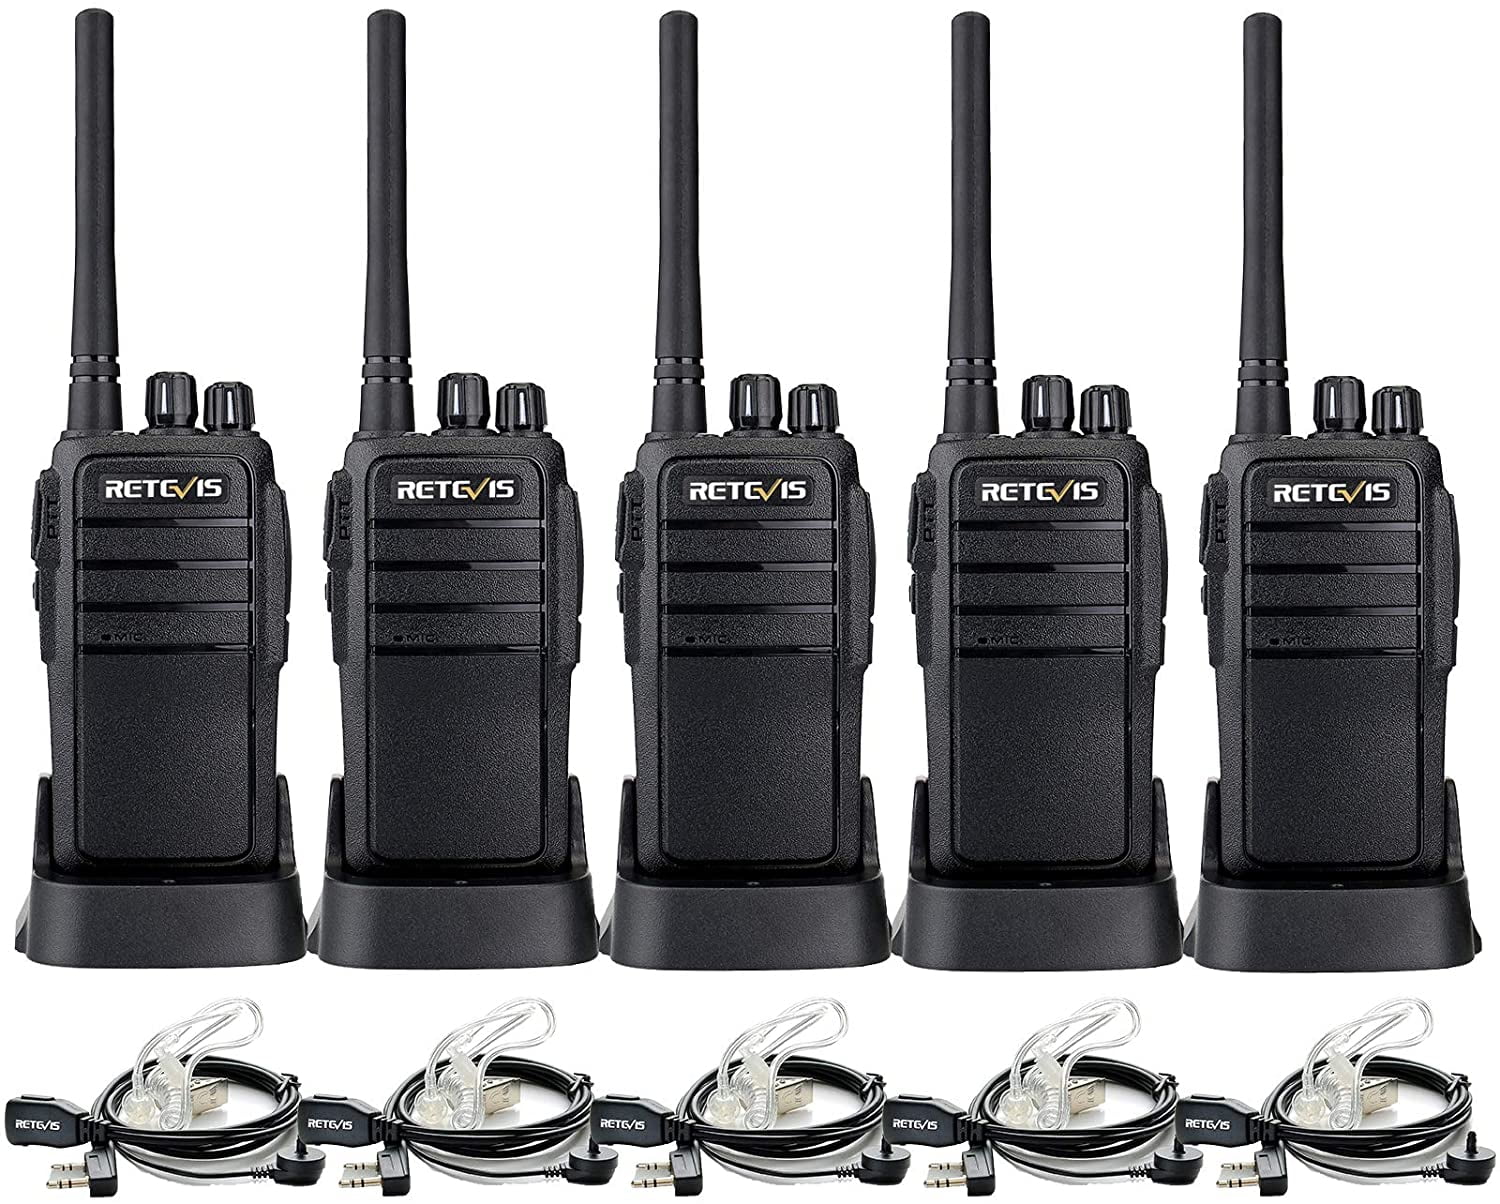 Retevis RT47V MURS 2 Way Radios IP67 Waterproof Walkie Talkie for Adults,Rugged Commercial 2 Way Radios for Factory Warehouse 6 Pack 